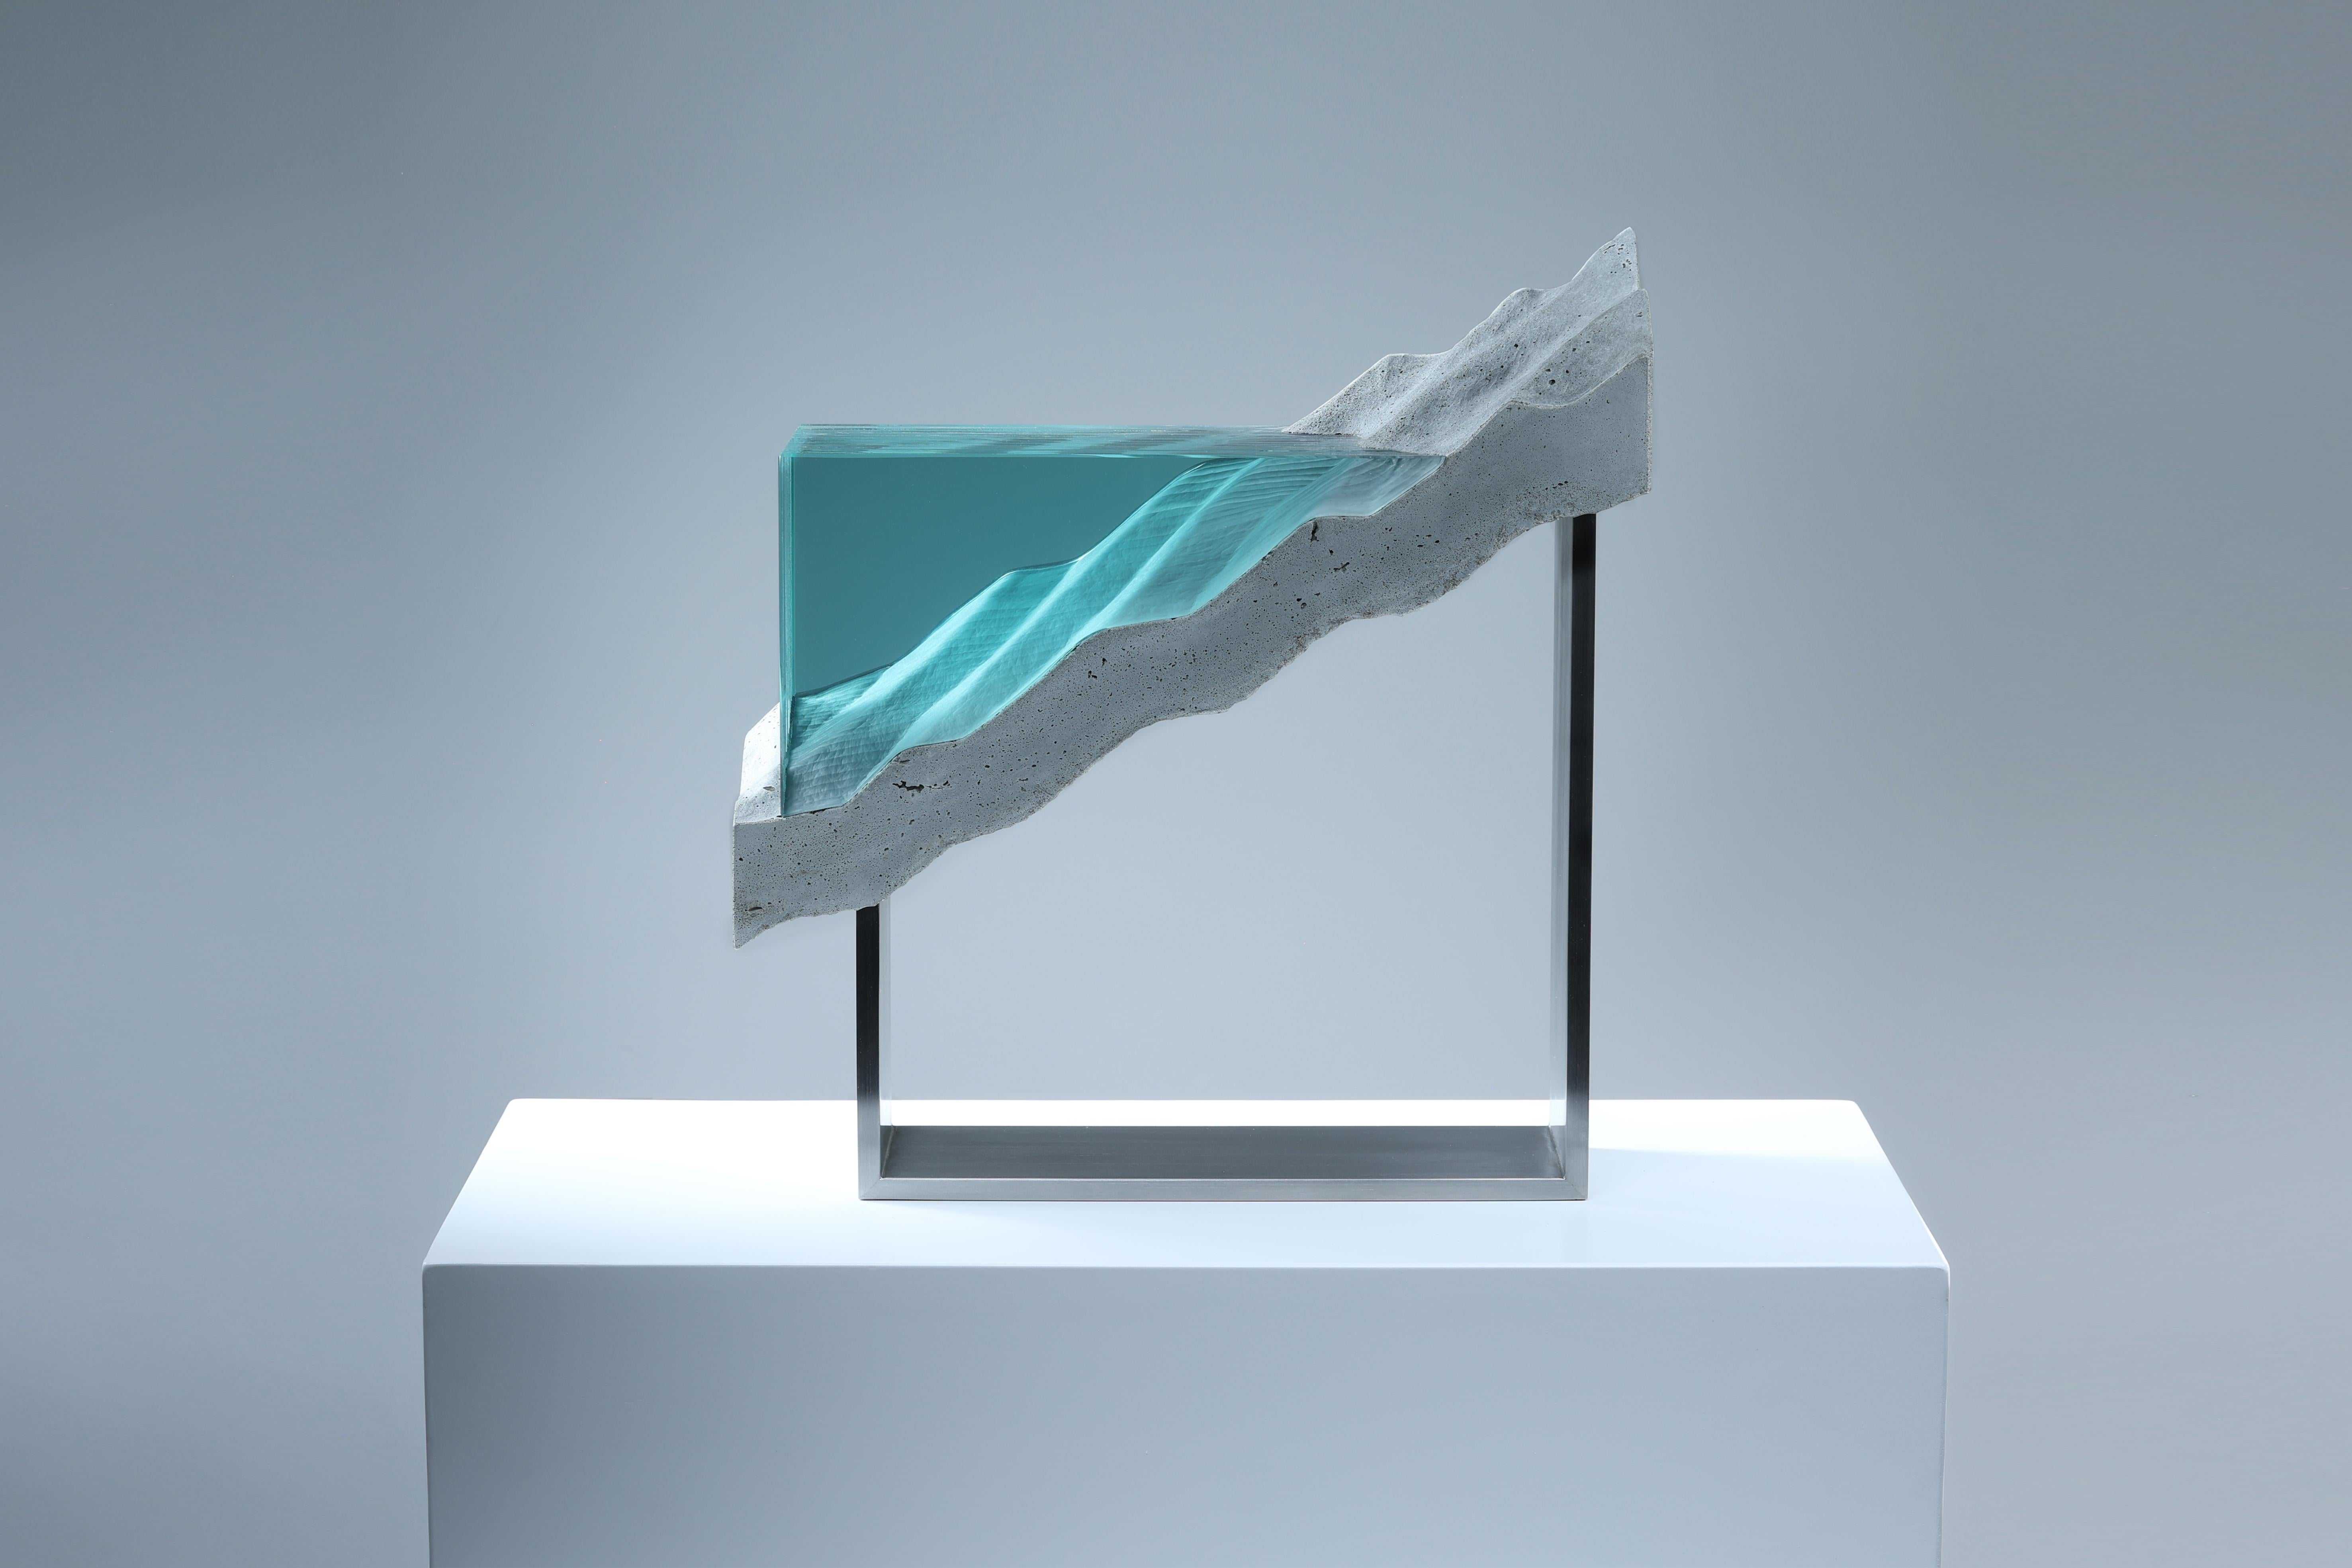 Continuum - Realist Sculpture by Ben Young